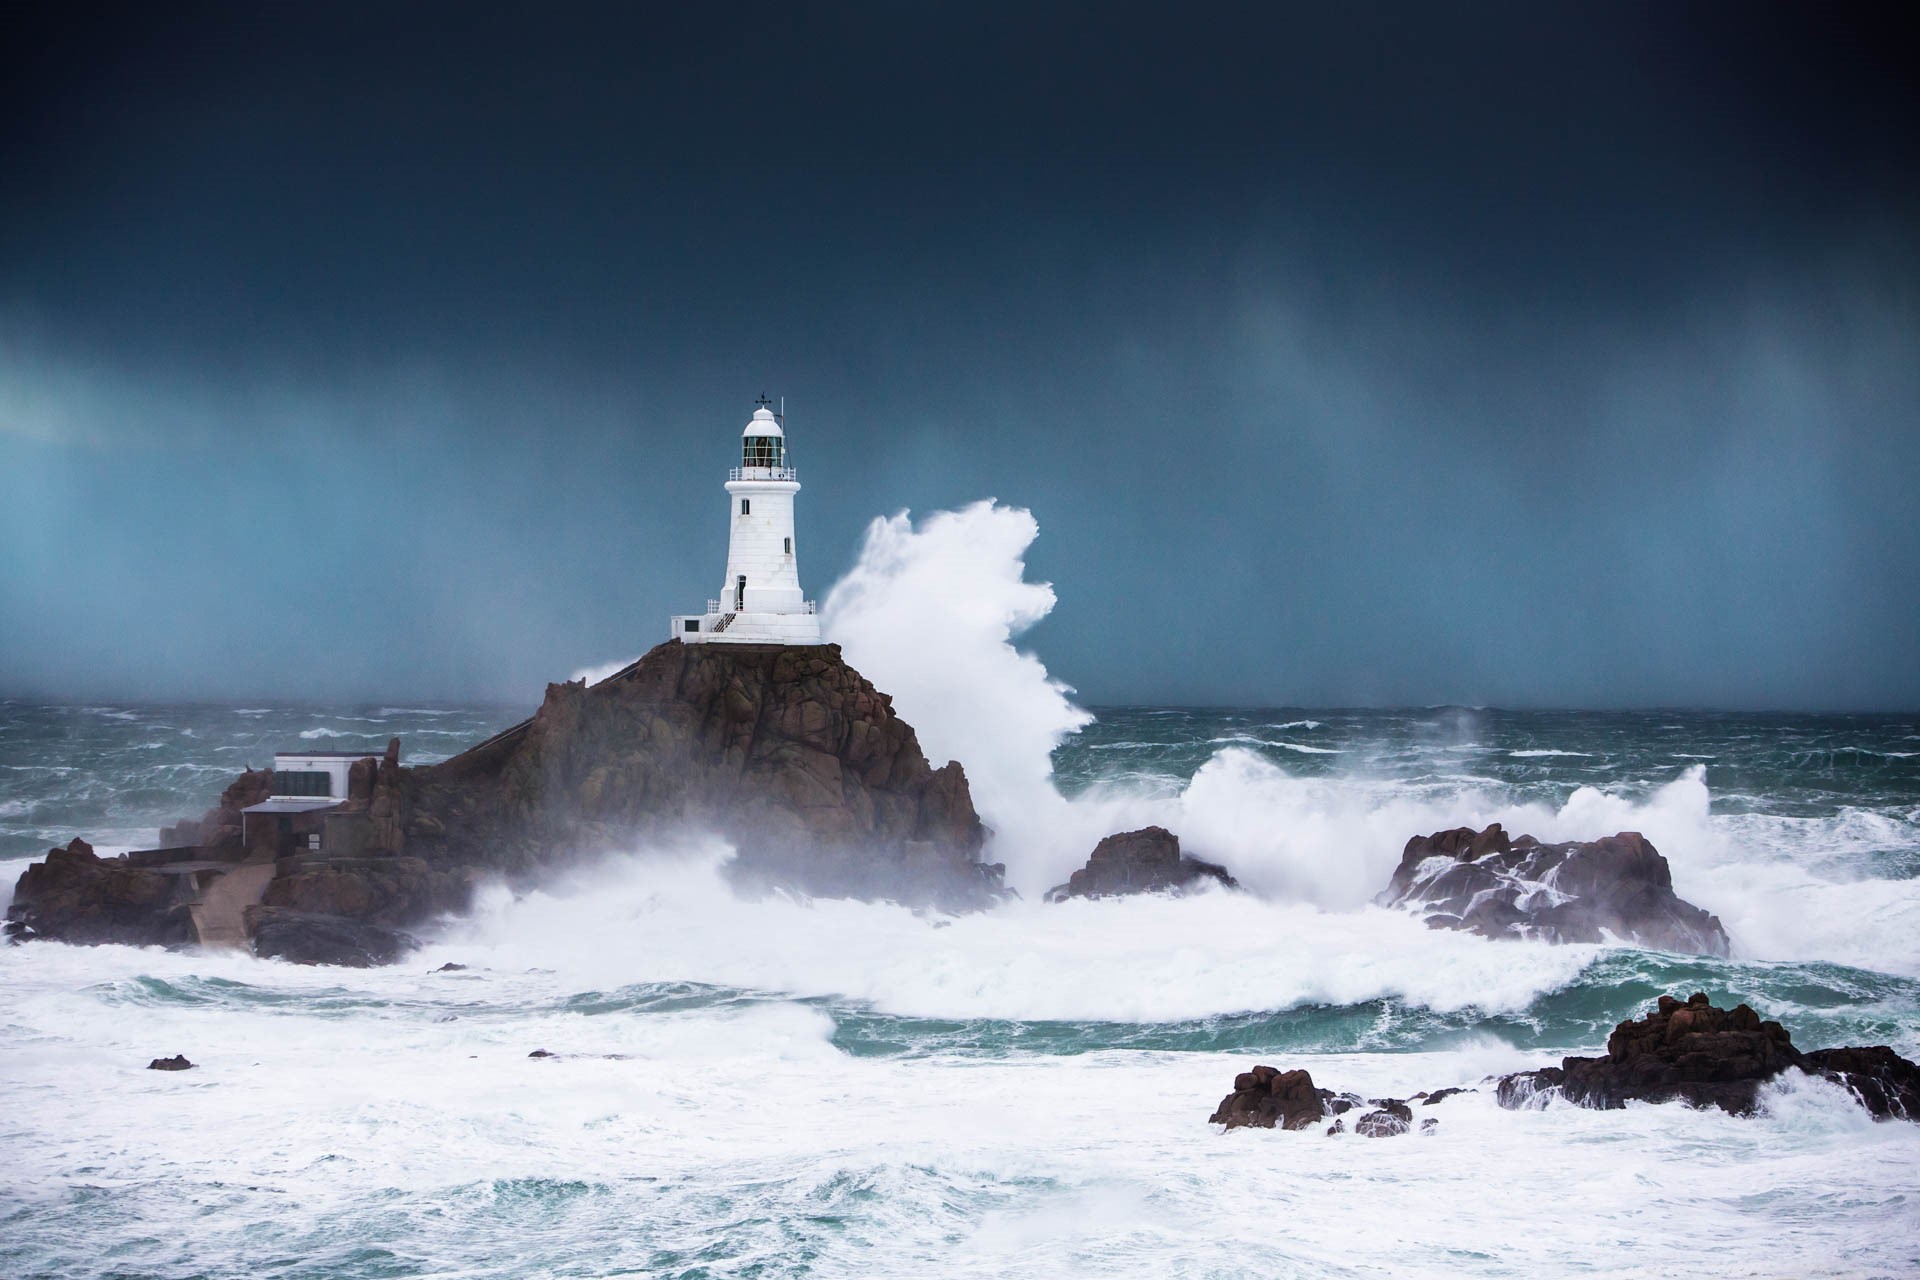 Corbiere Lighthouse surrounded by stormy winter seas